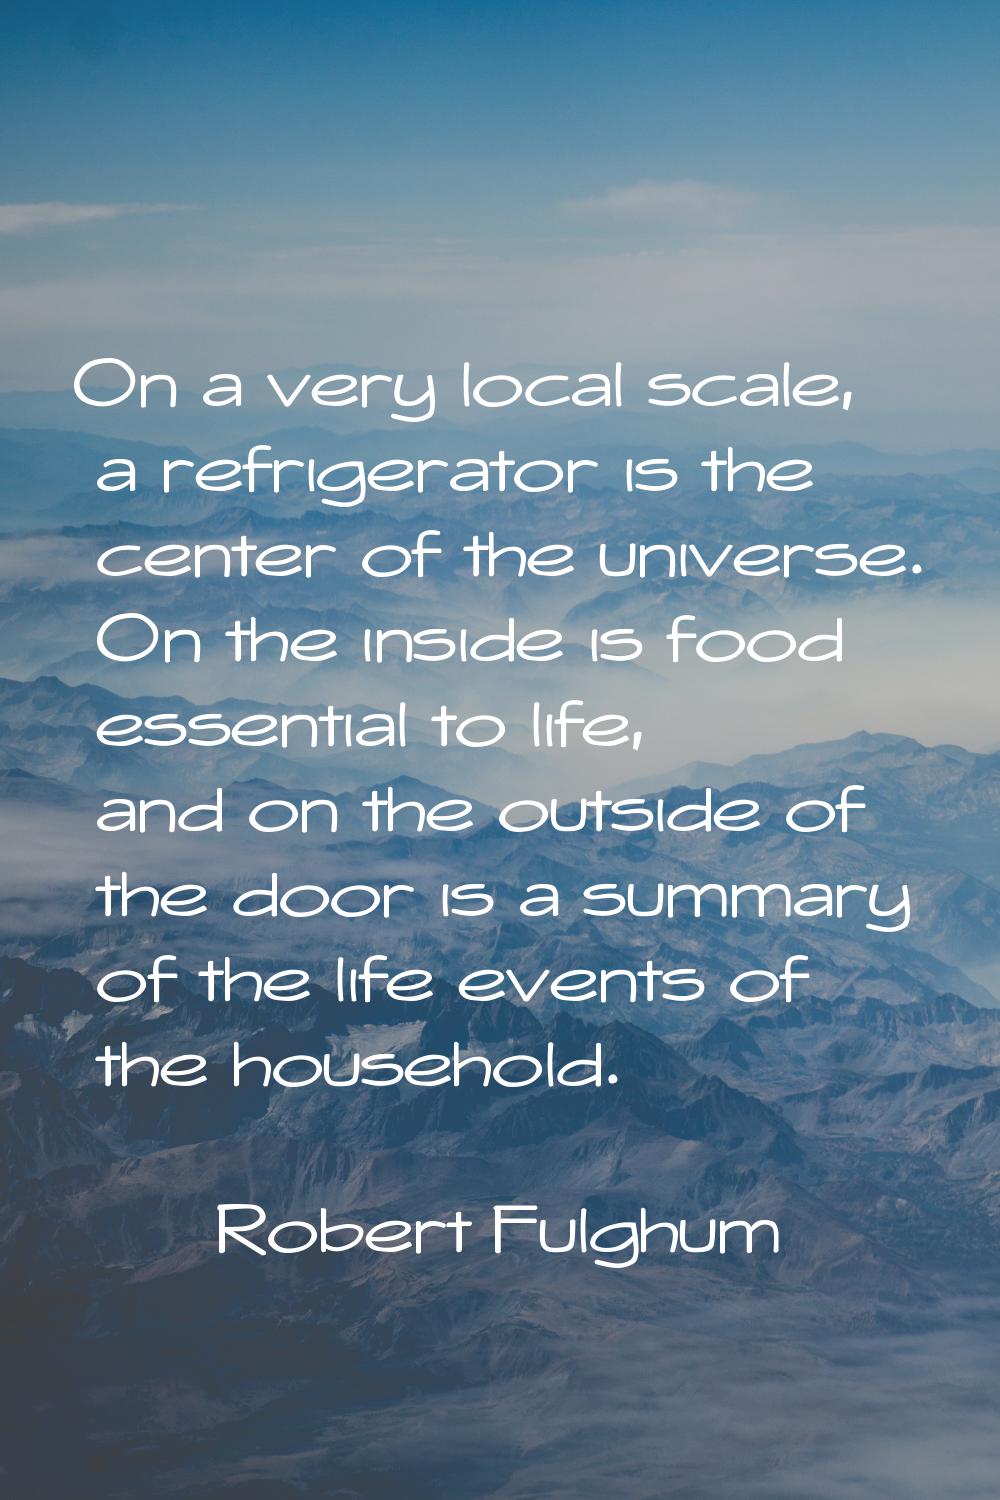 On a very local scale, a refrigerator is the center of the universe. On the inside is food essentia